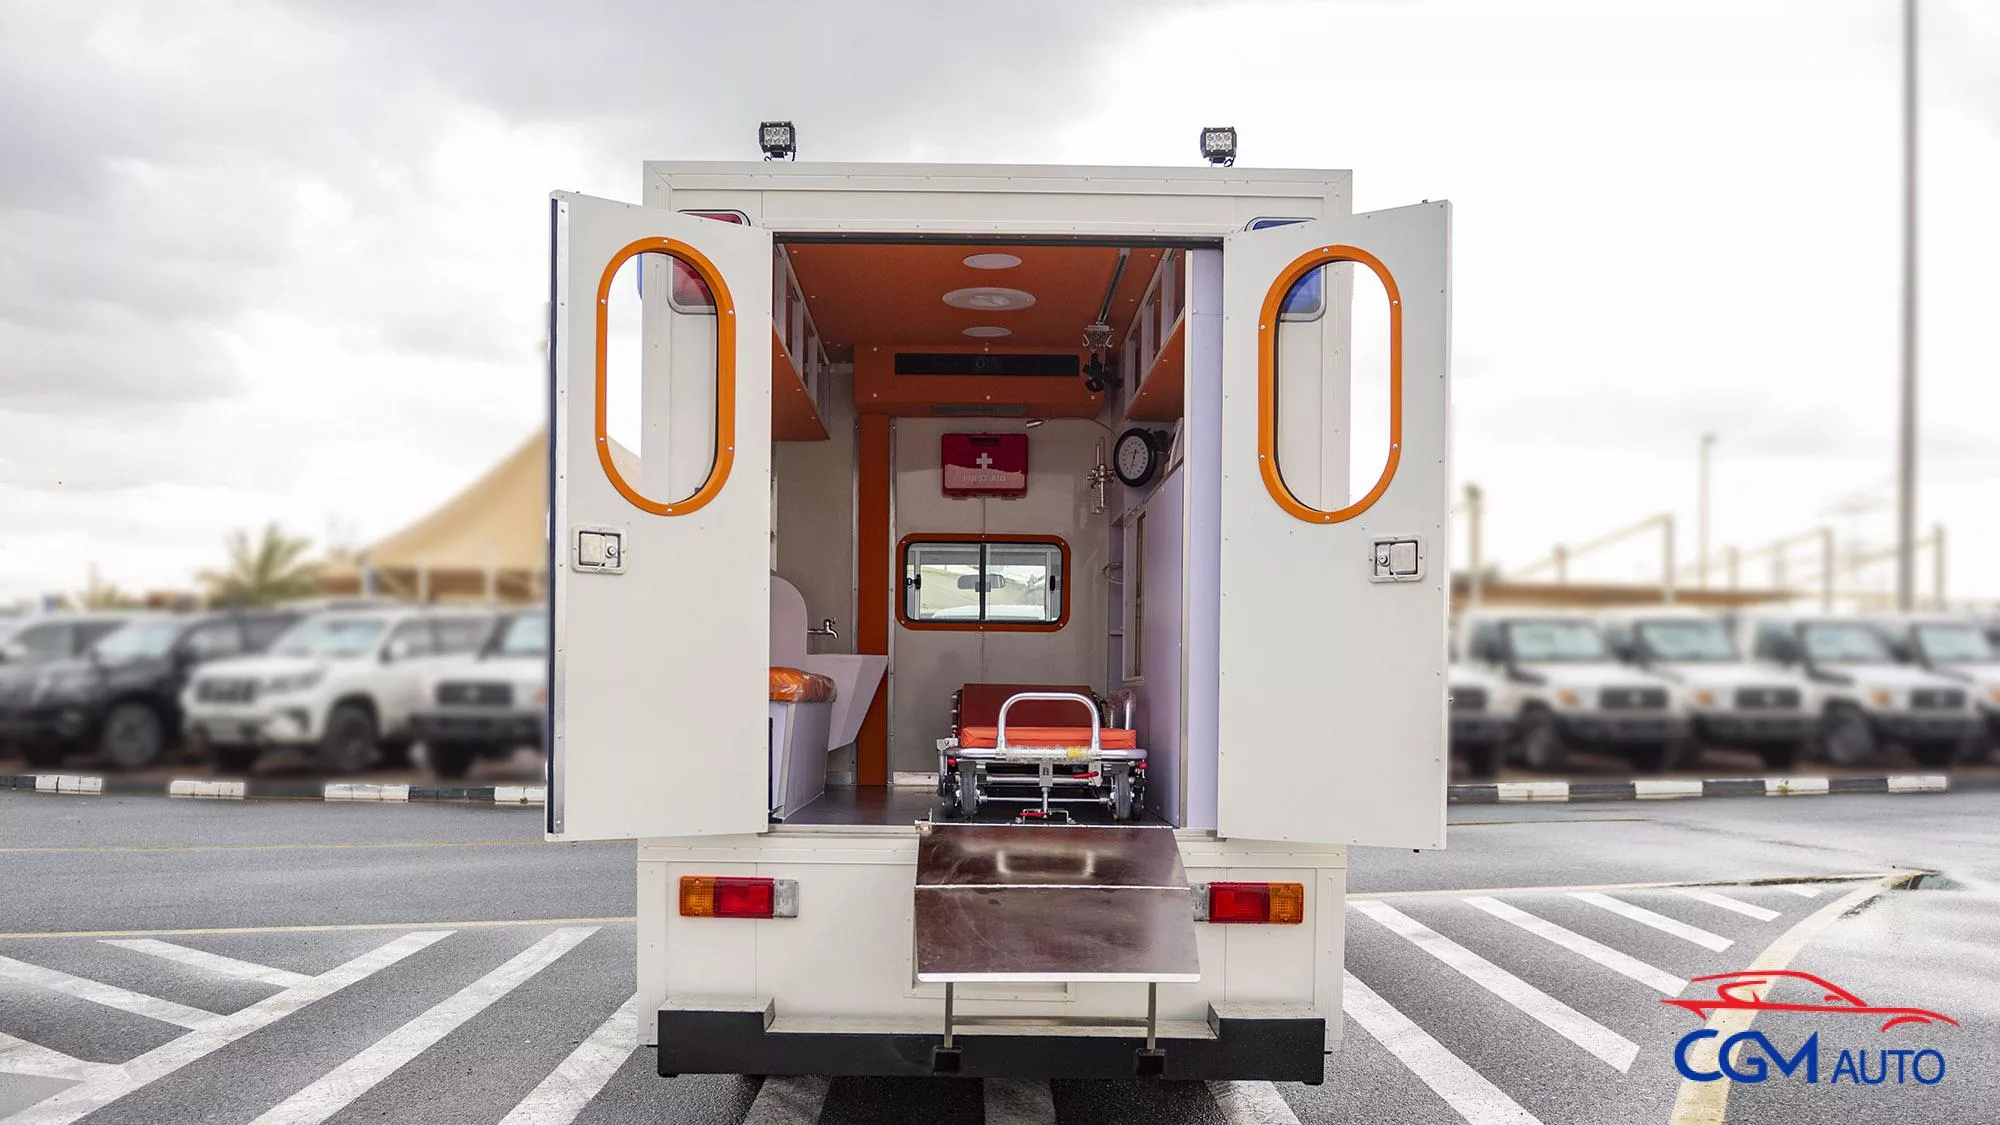 New Toyota Ambulance Car for sale in the UAE, Dubai, Sharjah and Abu Dhabi | Special Offers